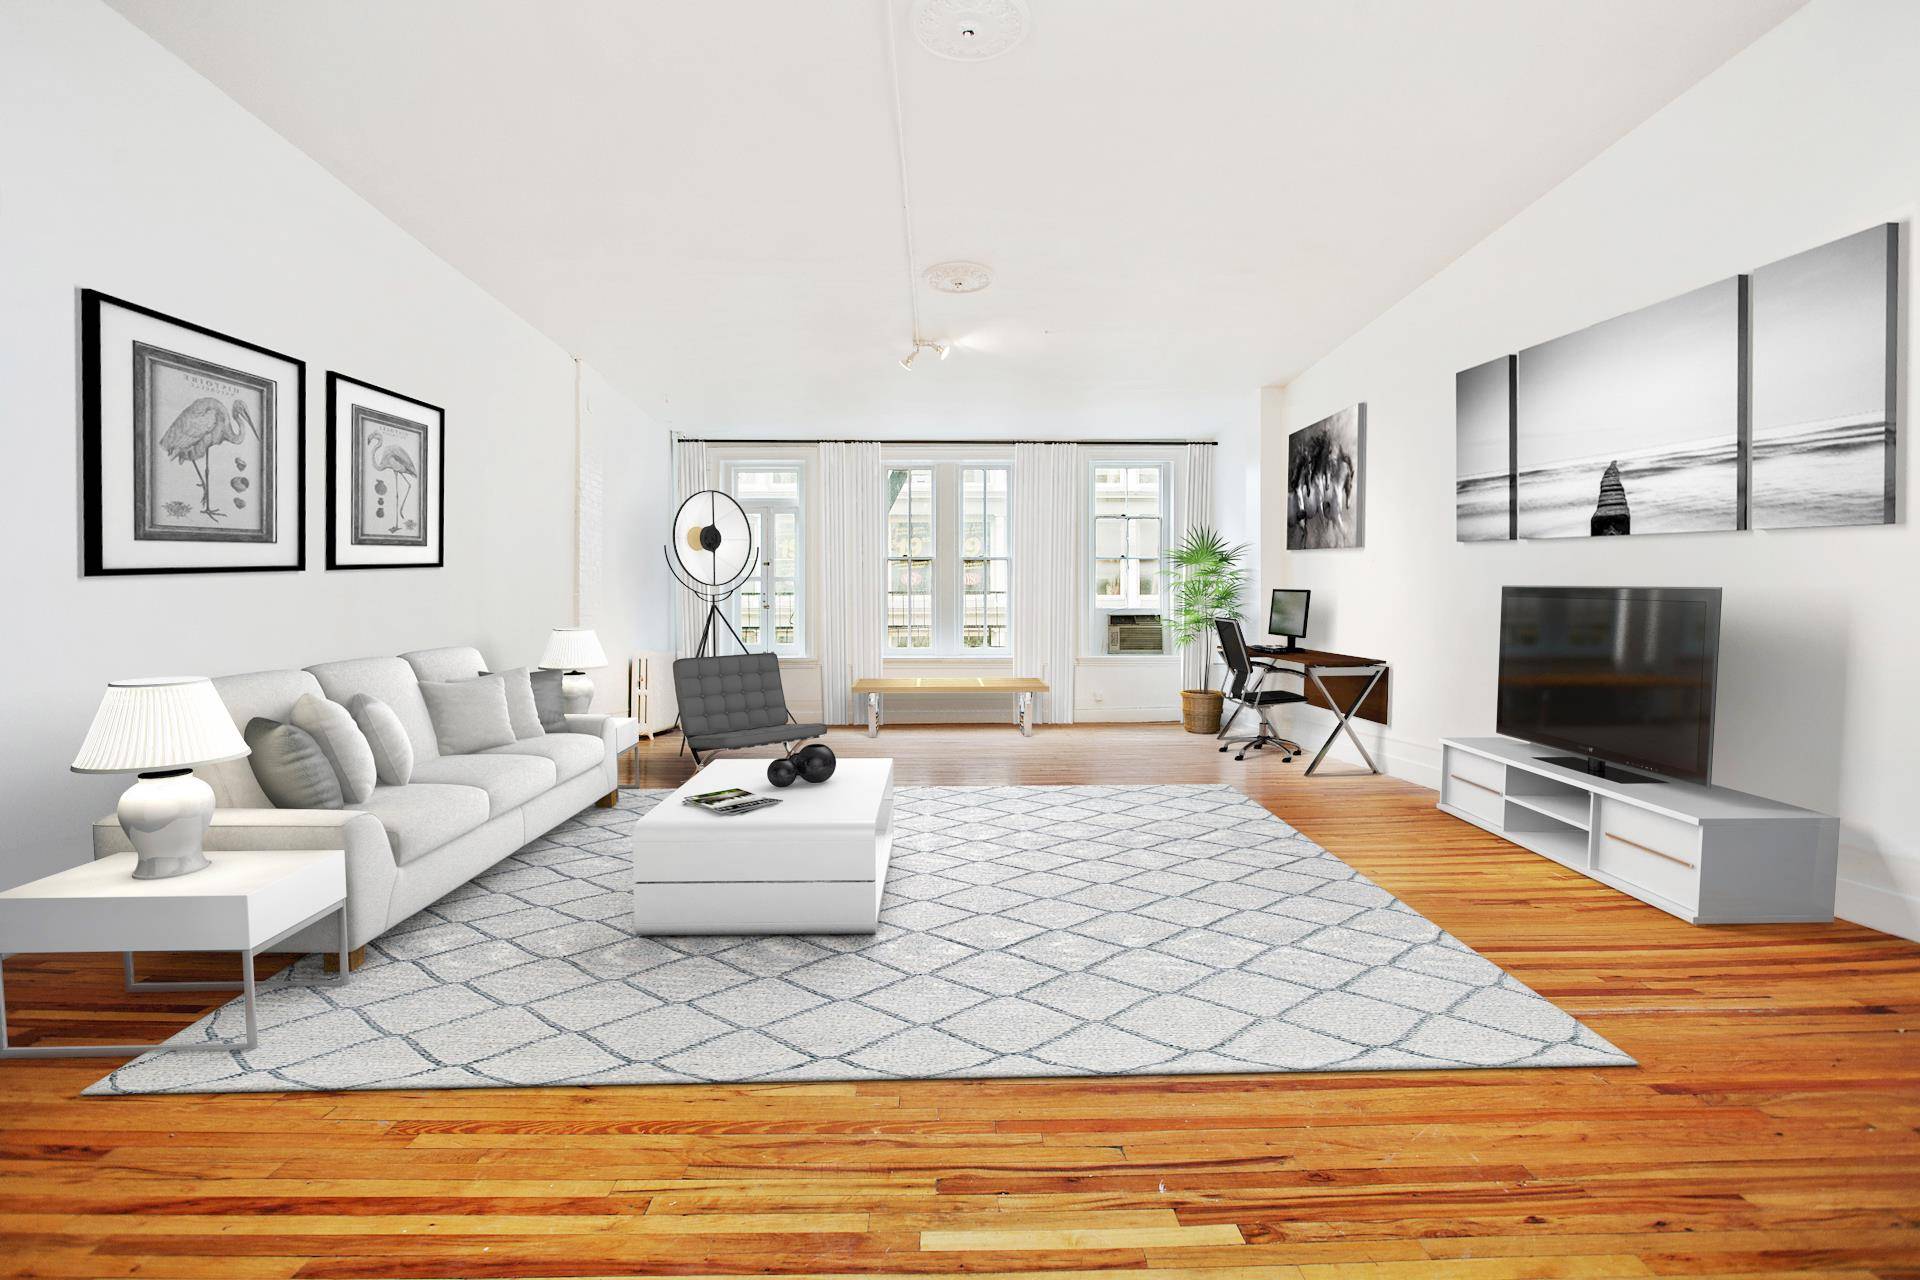 Authentic massive, full floor Loft offering 13 foot ceilings and large windows allowing for excellent natural light through double exposures in the heart of SoHo between Spring and Broome.